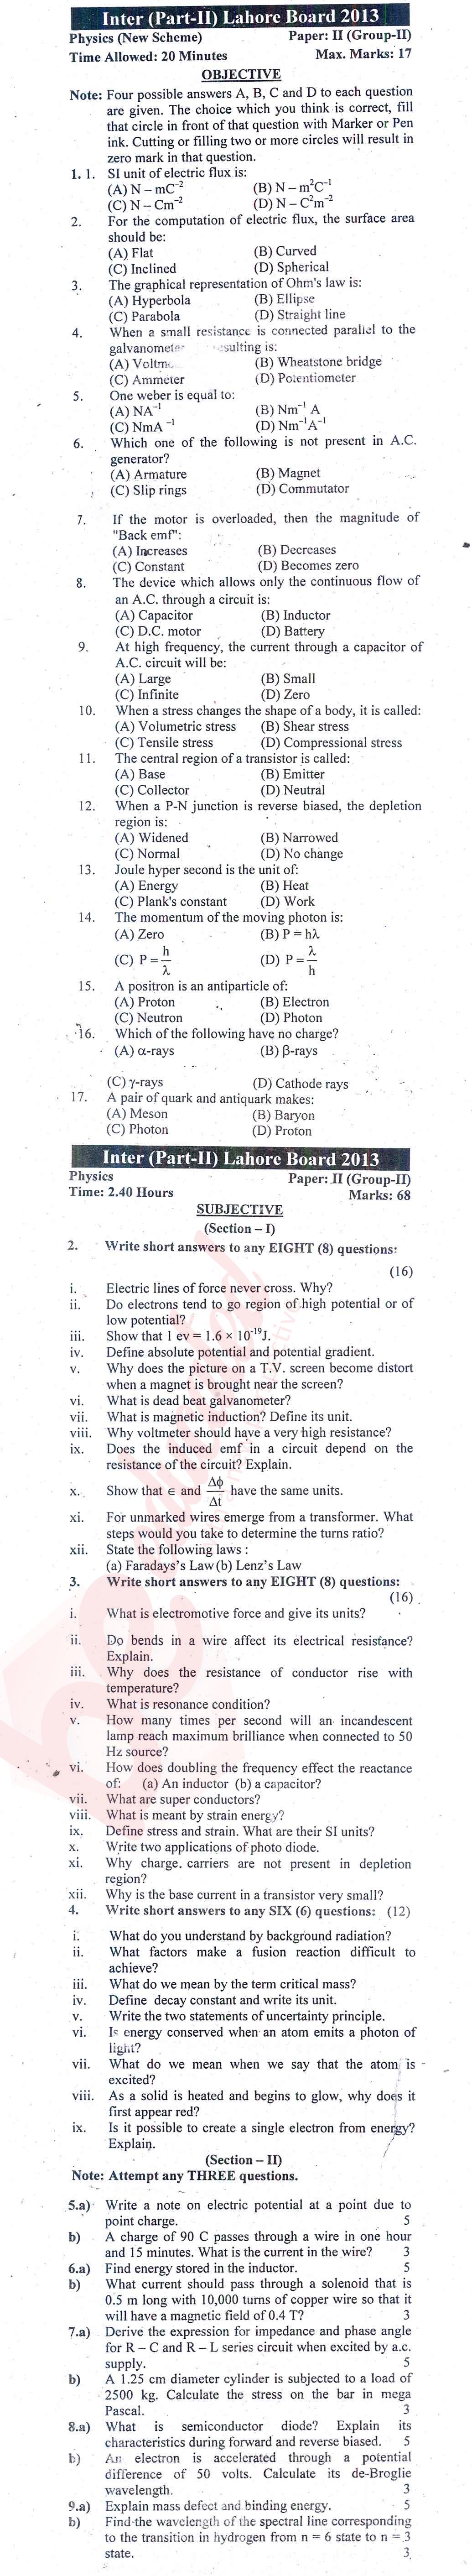 Physics 12th class Past Paper Group 2 BISE Lahore 2013